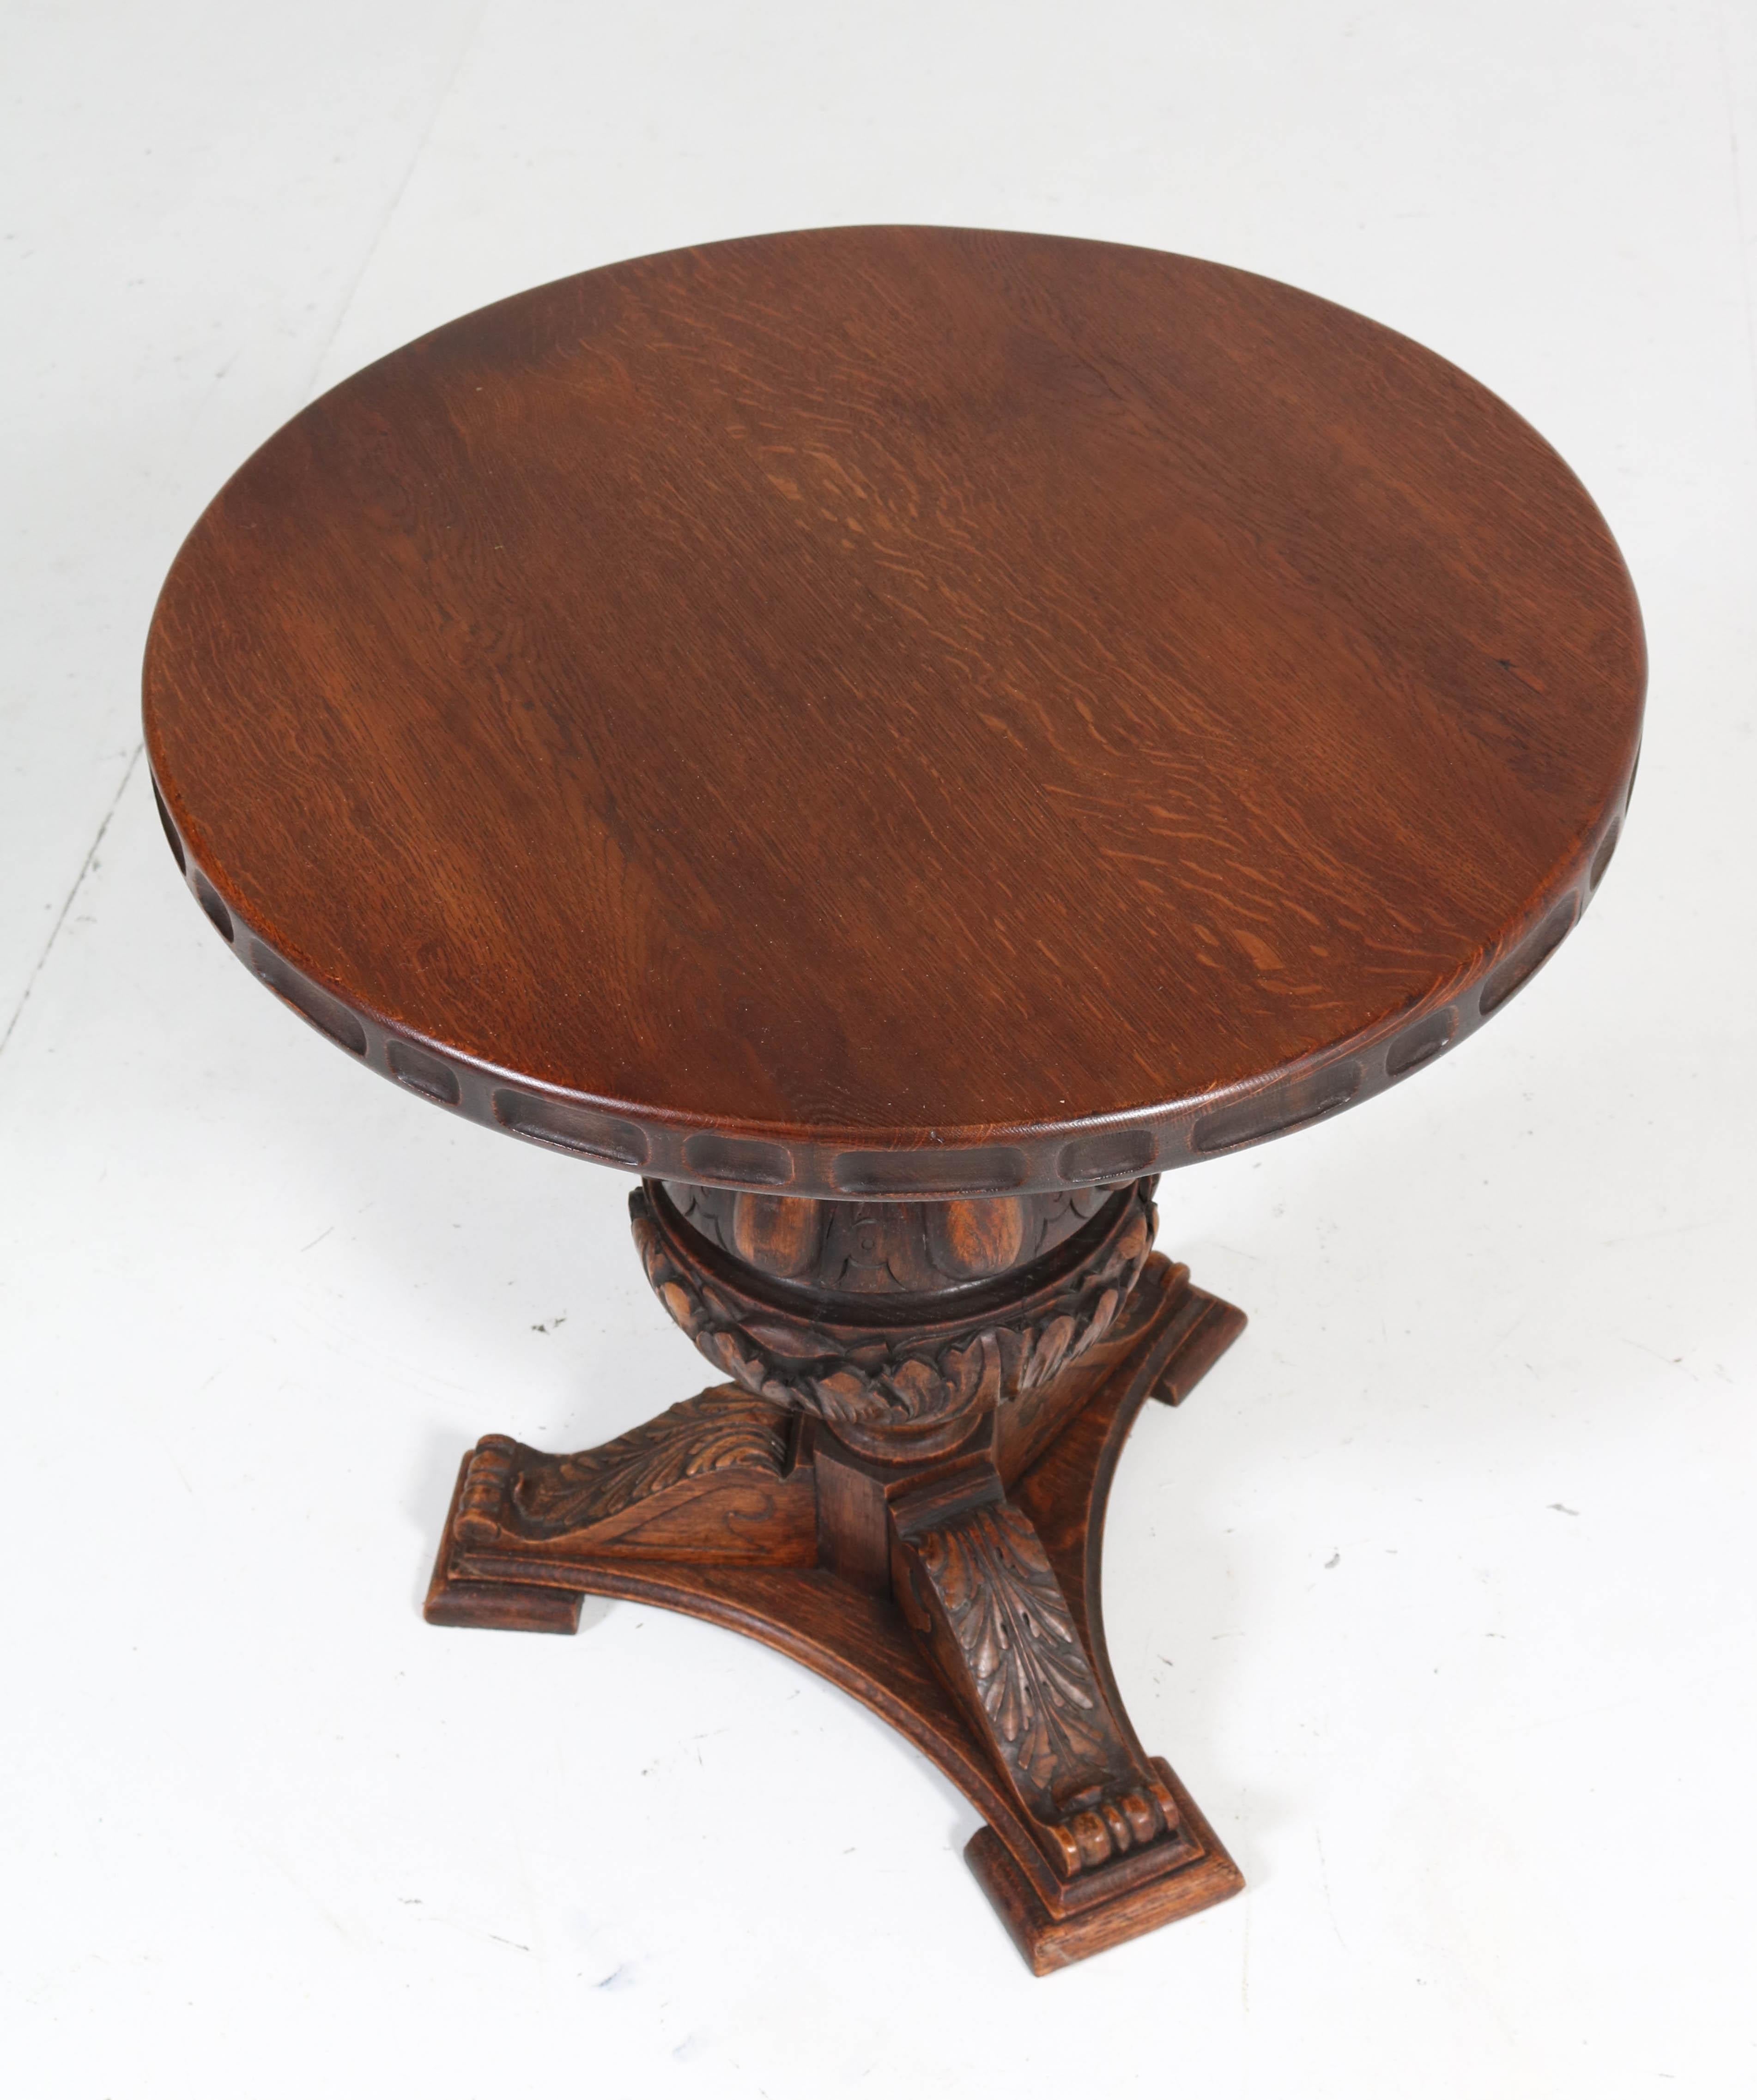 Wonderful Gothic Revival side table.
Solid oak carved base with solid oak top.
In very good condition with minor wear consistent with age and use,
preserving a beautiful patina.